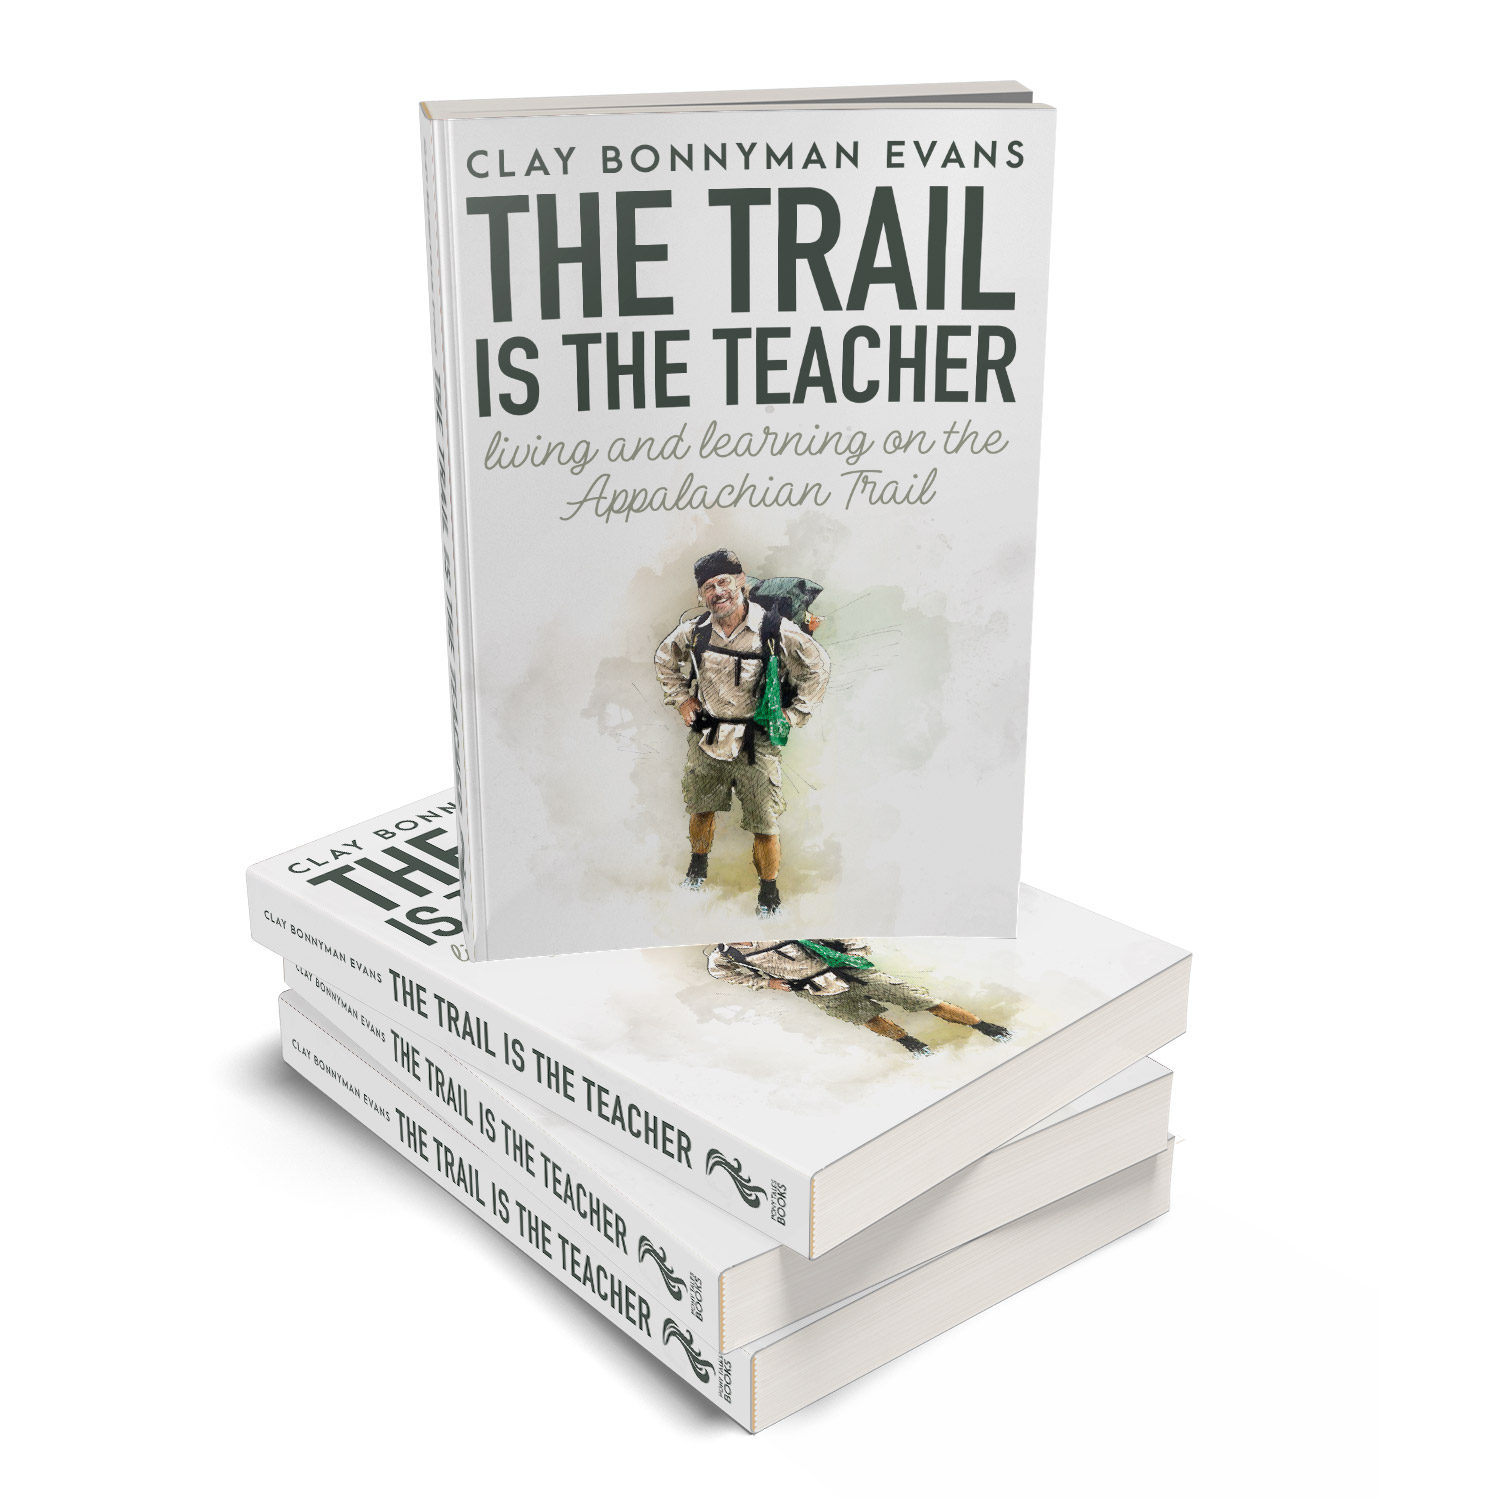 'The Trail Is The Teacher' is a joyous, life-affirming walking memoir, set of the Appalachian Trail. The author is Clay Bonnyman Evans. The book cover design and interior formatting are by Mark Thomas. To learn more about what Mark could do for your book, please visit coverness.com.